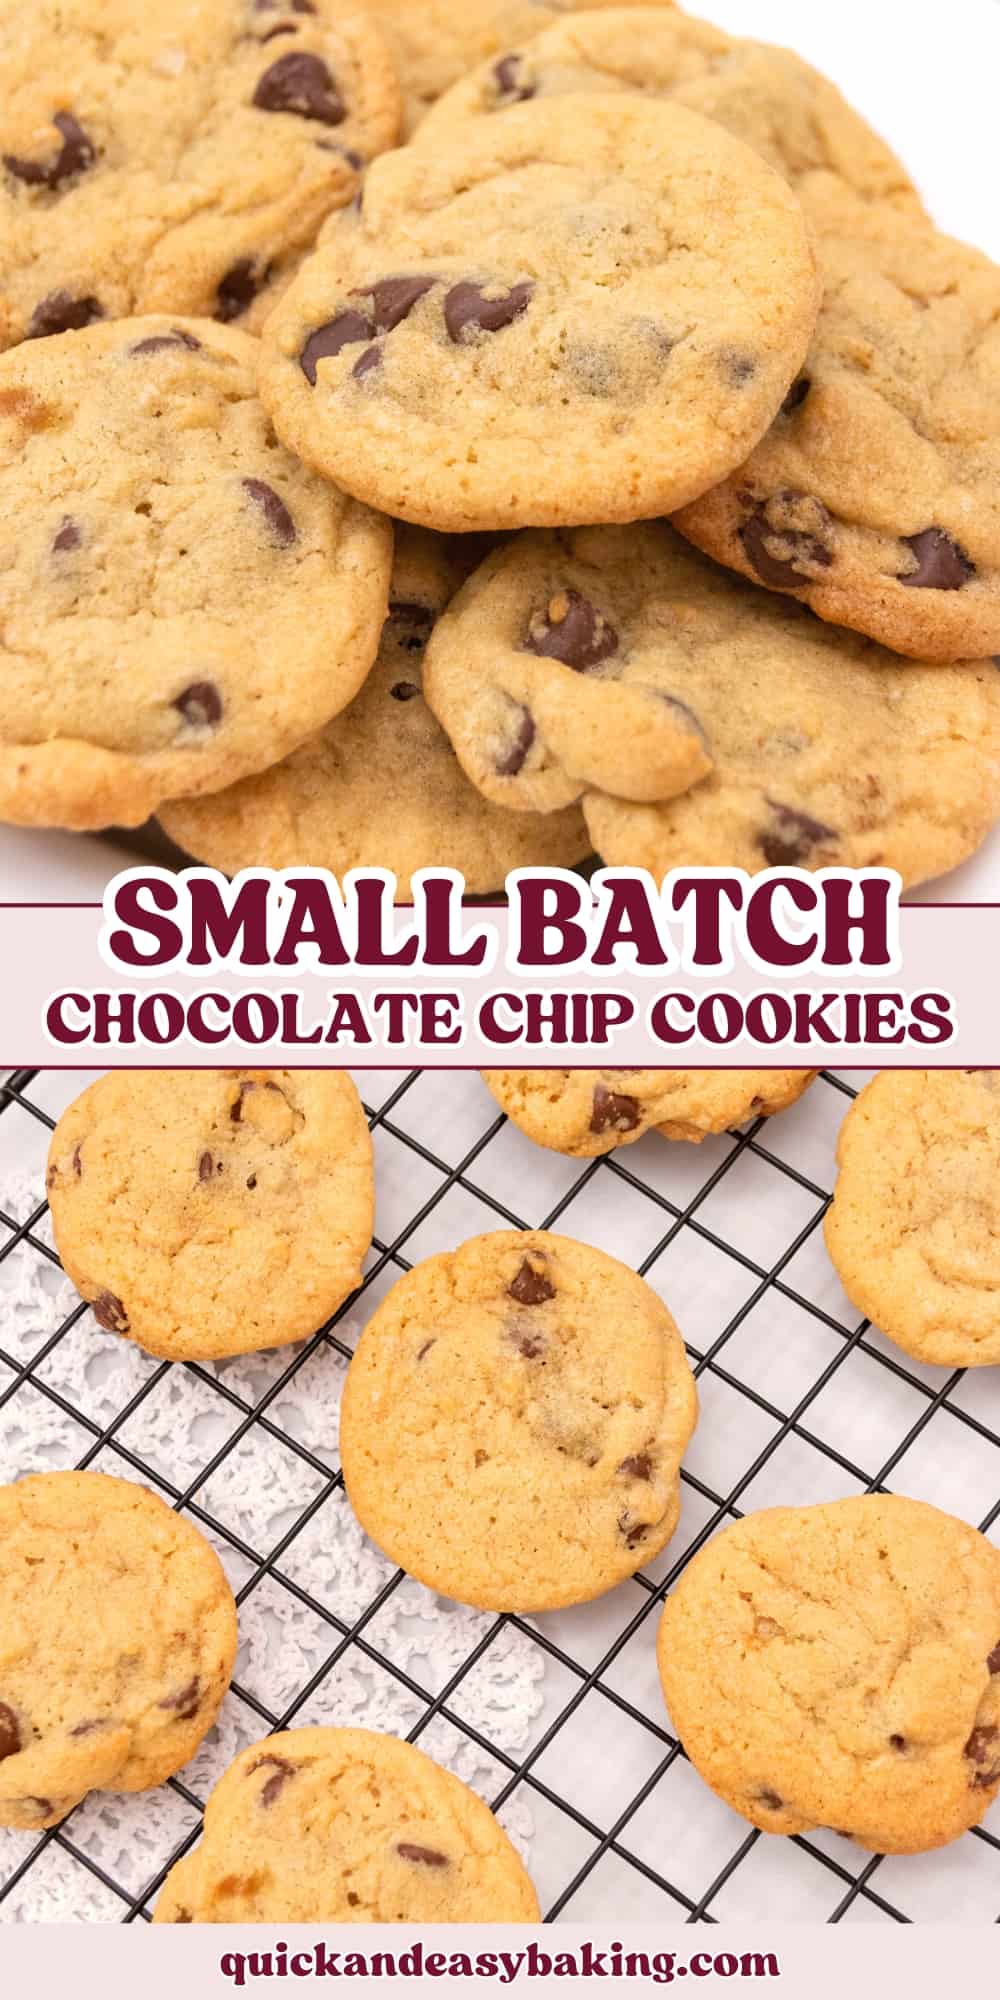 Pinterest image of chocolate chip cookies baked on a platter and on a cooling rack with text overlay.